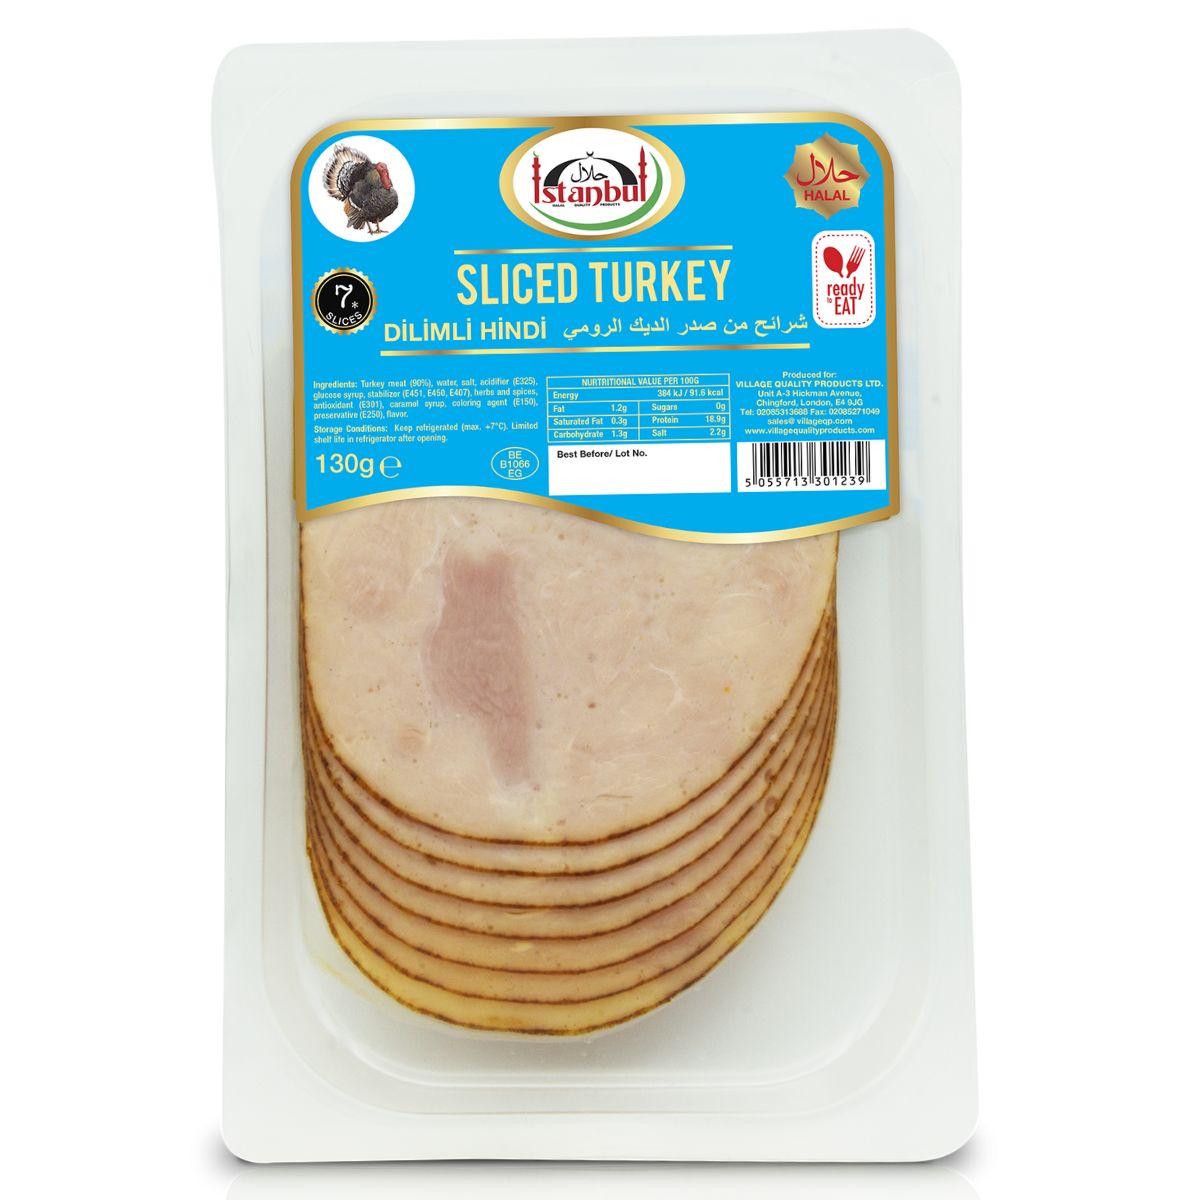 A package of Istanbul - Sliced Turkey Breast (Halal) - 130g on a white background.